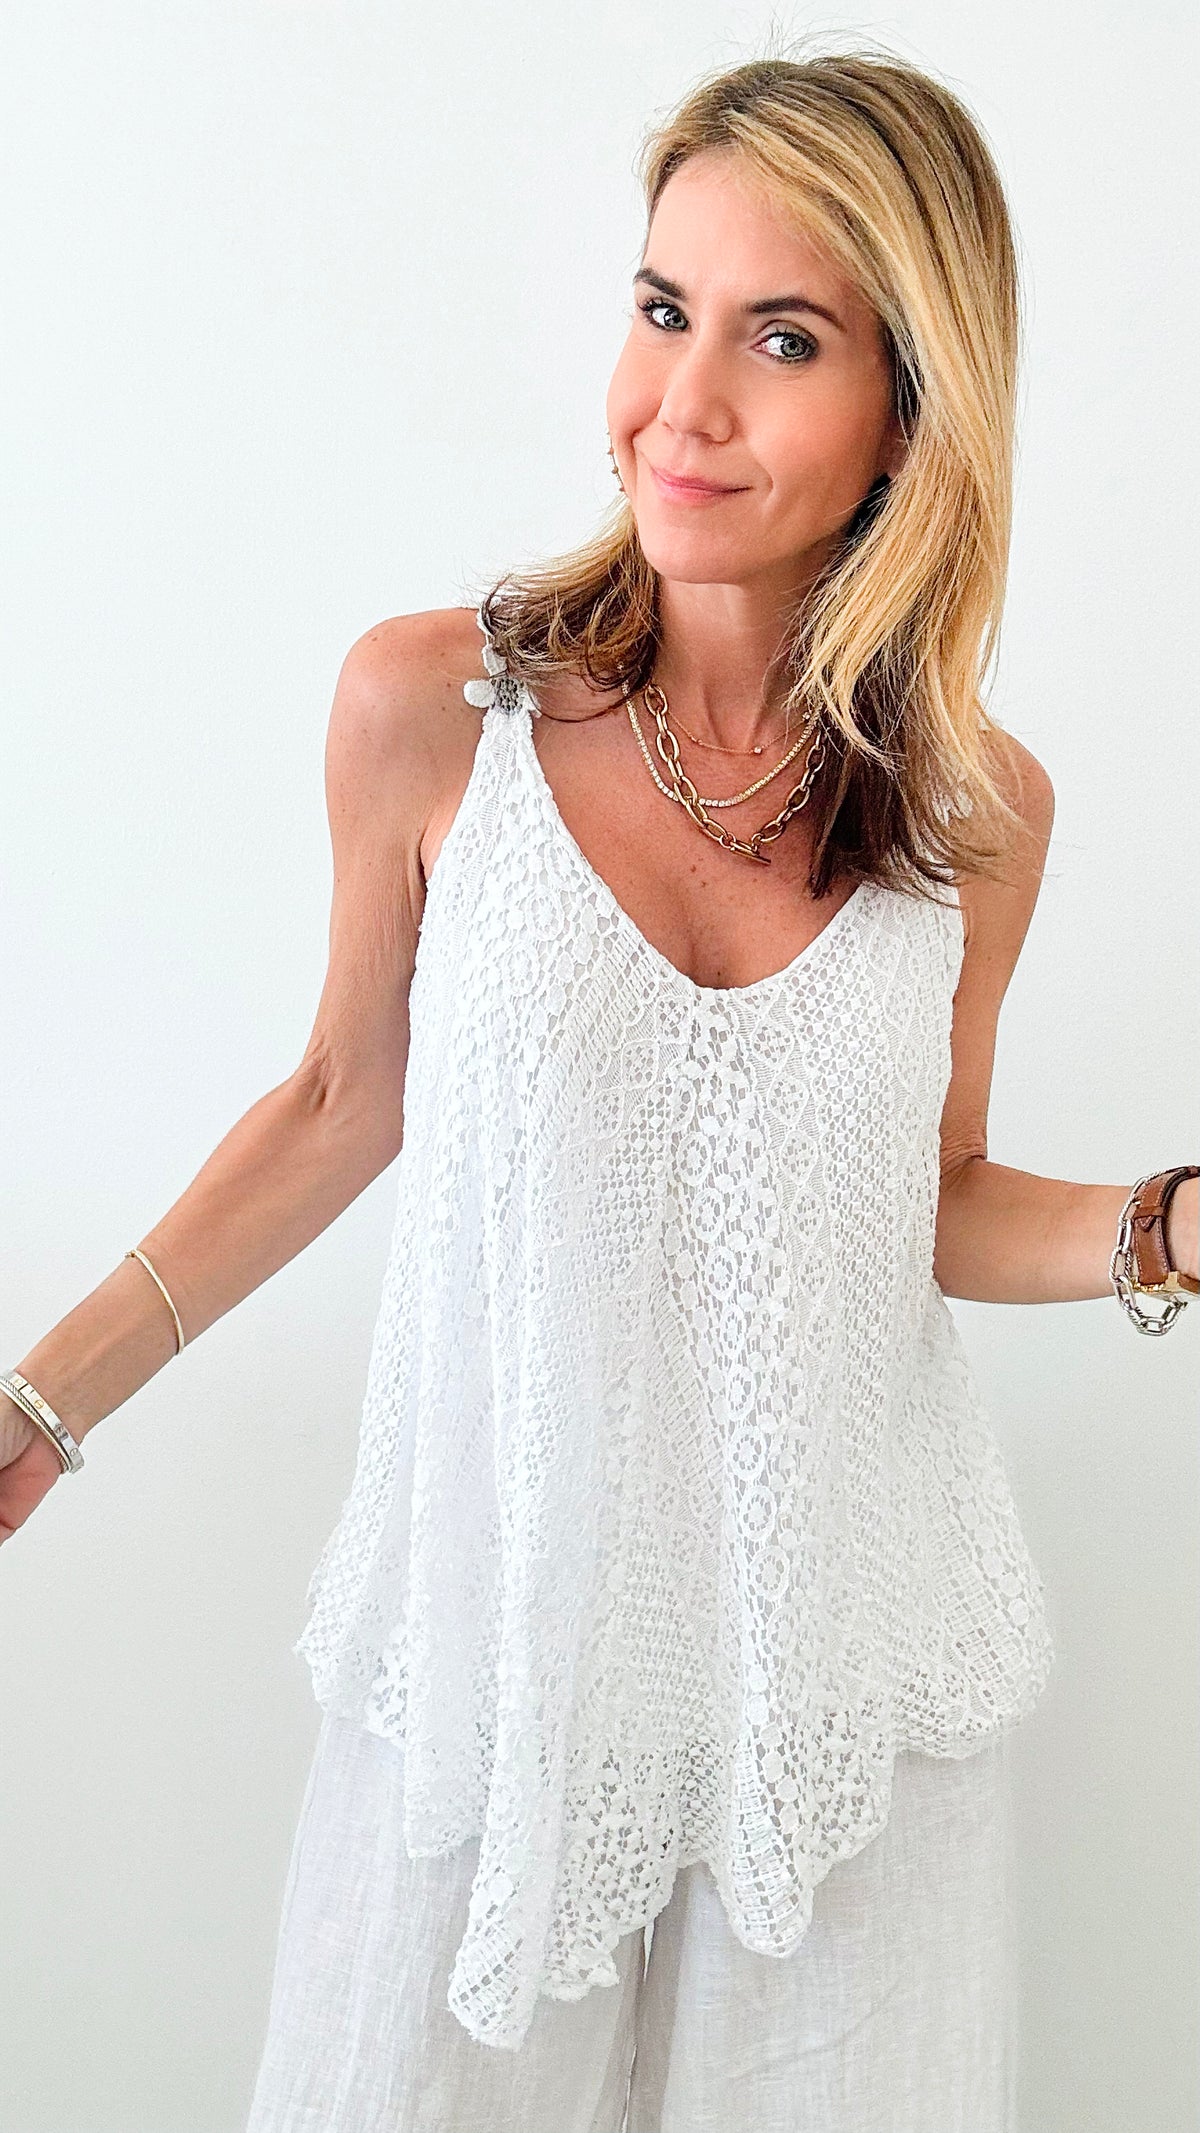 Delicate Daisy Italian Tank - White-00 Sleevless Tops-Italianissimo-Coastal Bloom Boutique, find the trendiest versions of the popular styles and looks Located in Indialantic, FL